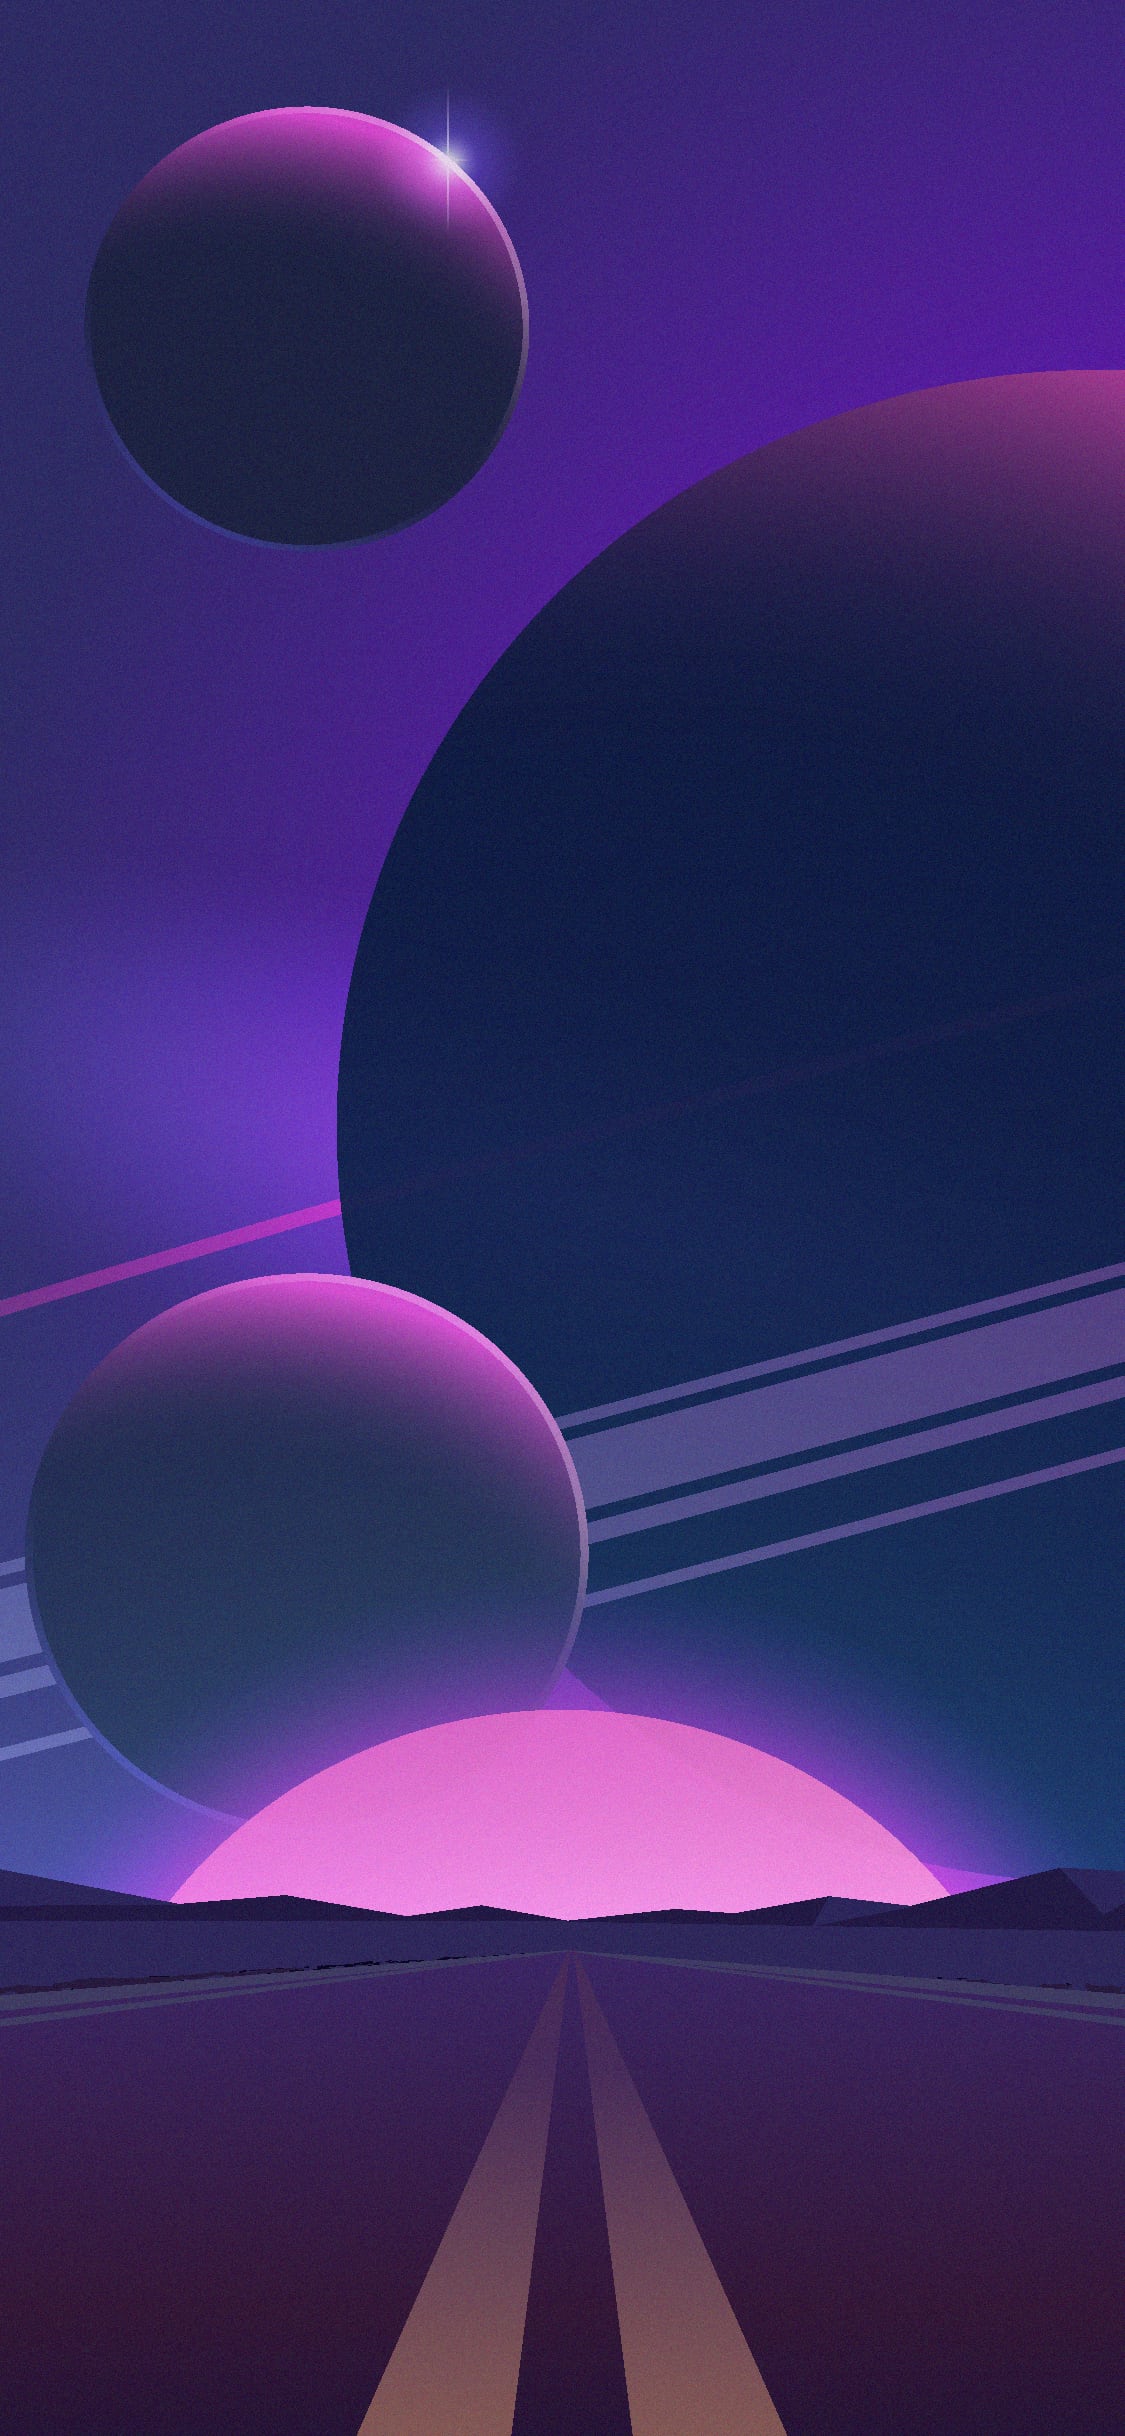 iphone x space wallpapers 01